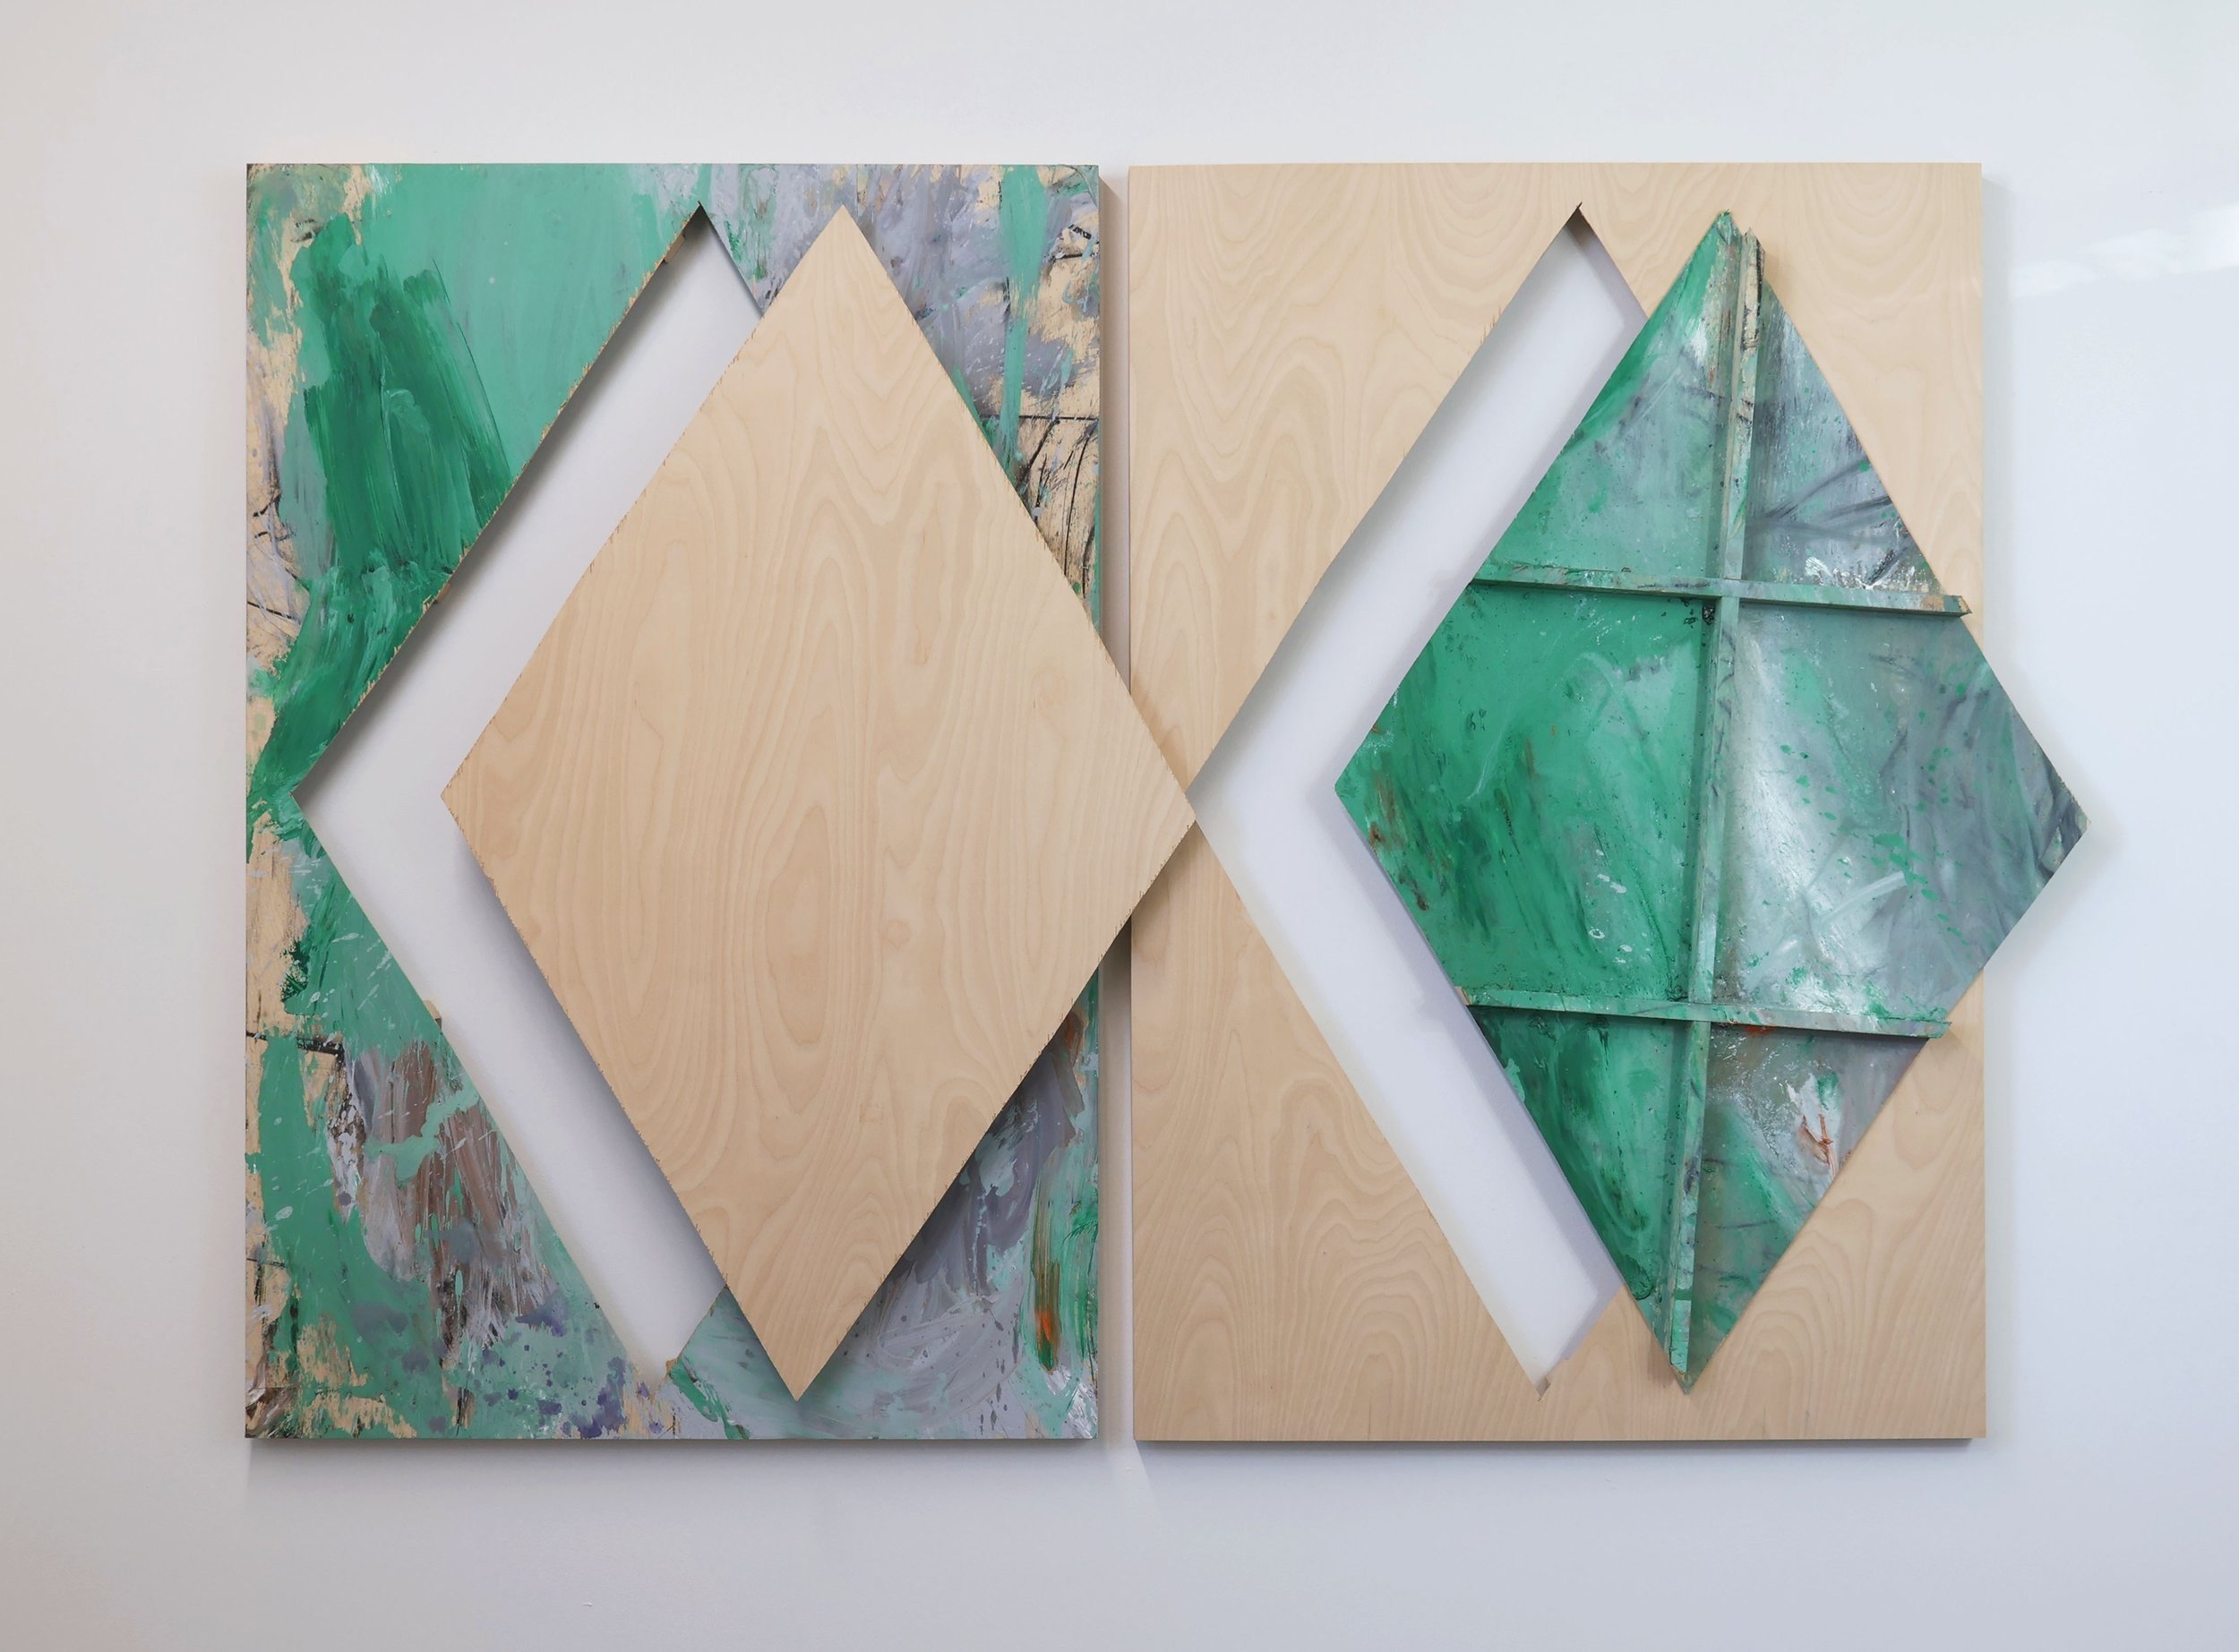  Untitled  Acrylic, charcoal, graphite pencil on wood panel.   60 x 86 x 2 in (Diptych)  2023 